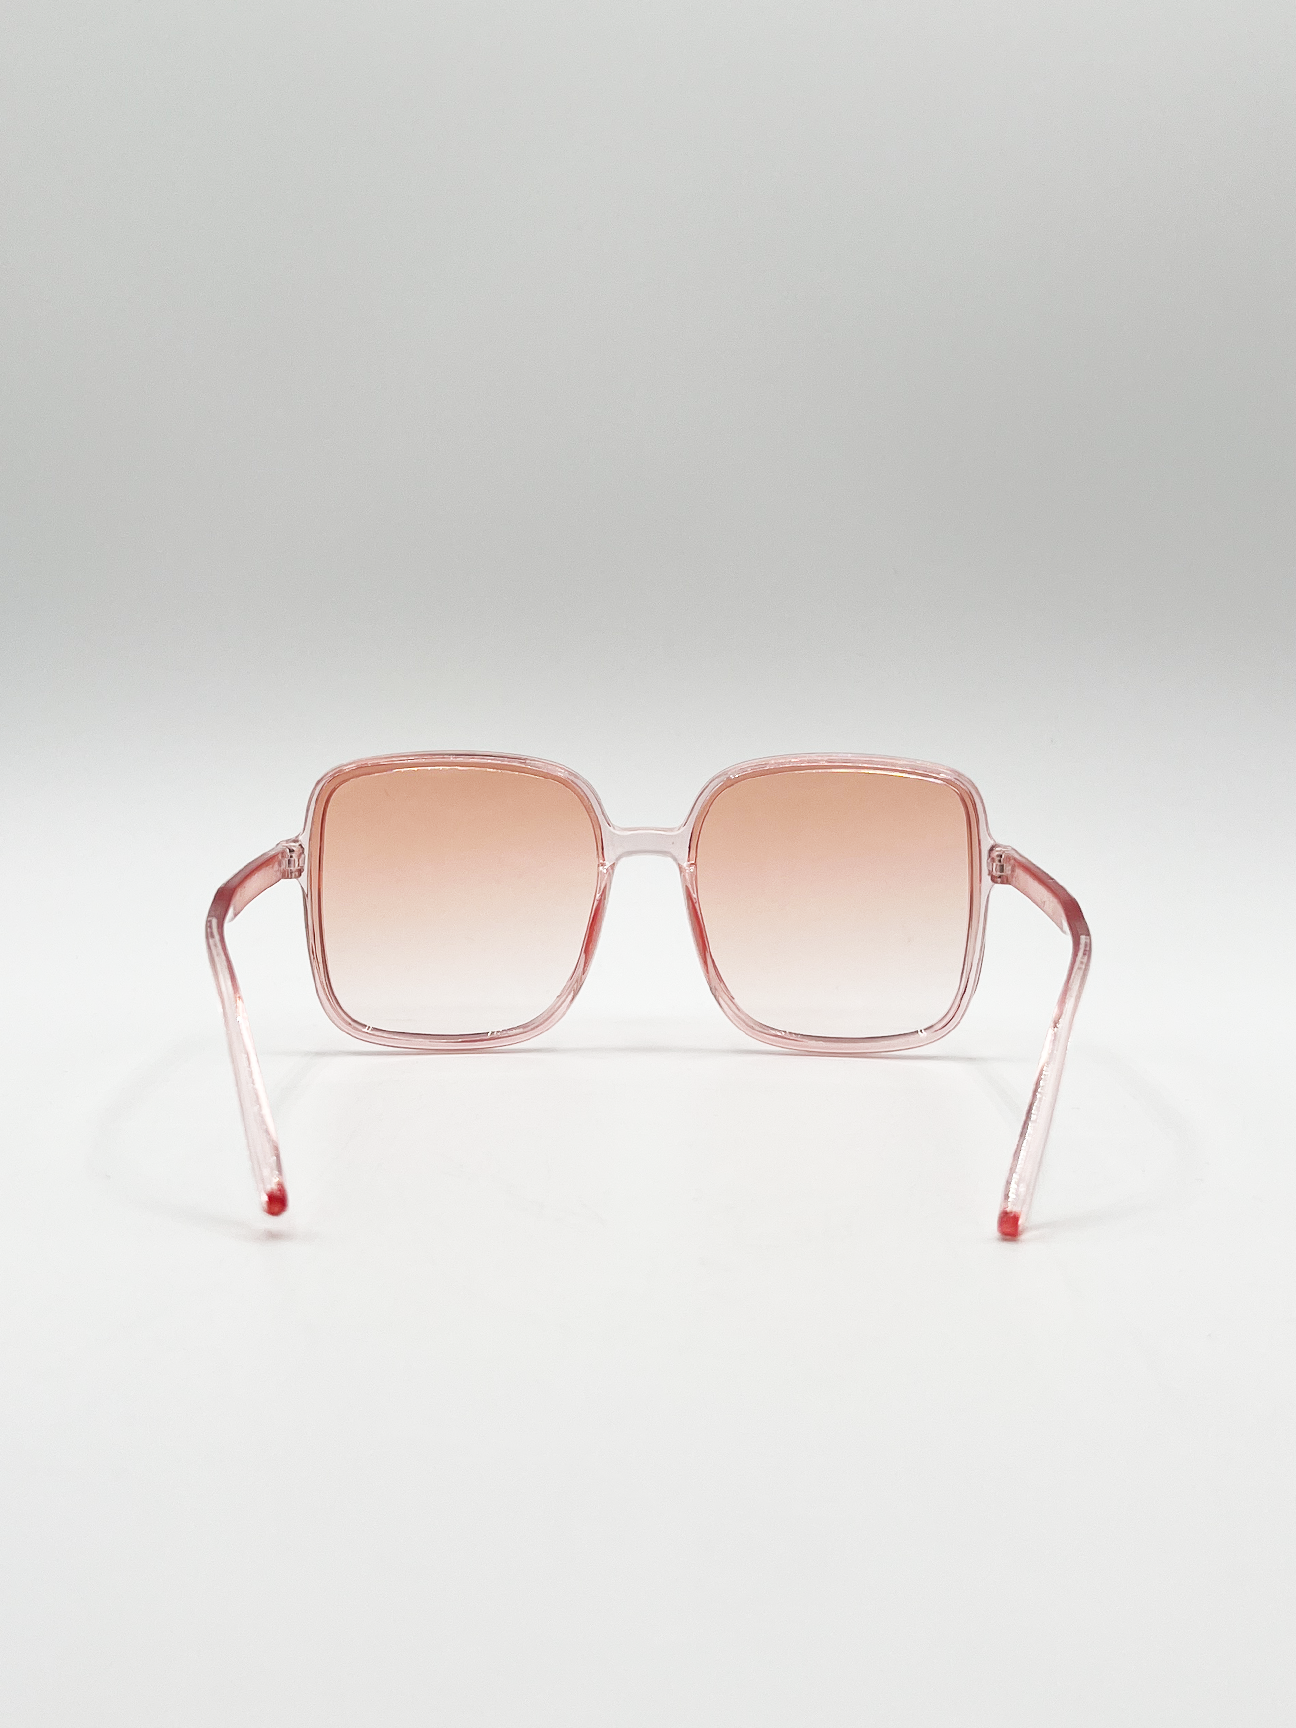 Oversized Lightweight Square Frame Sunglasses in Pale Pink